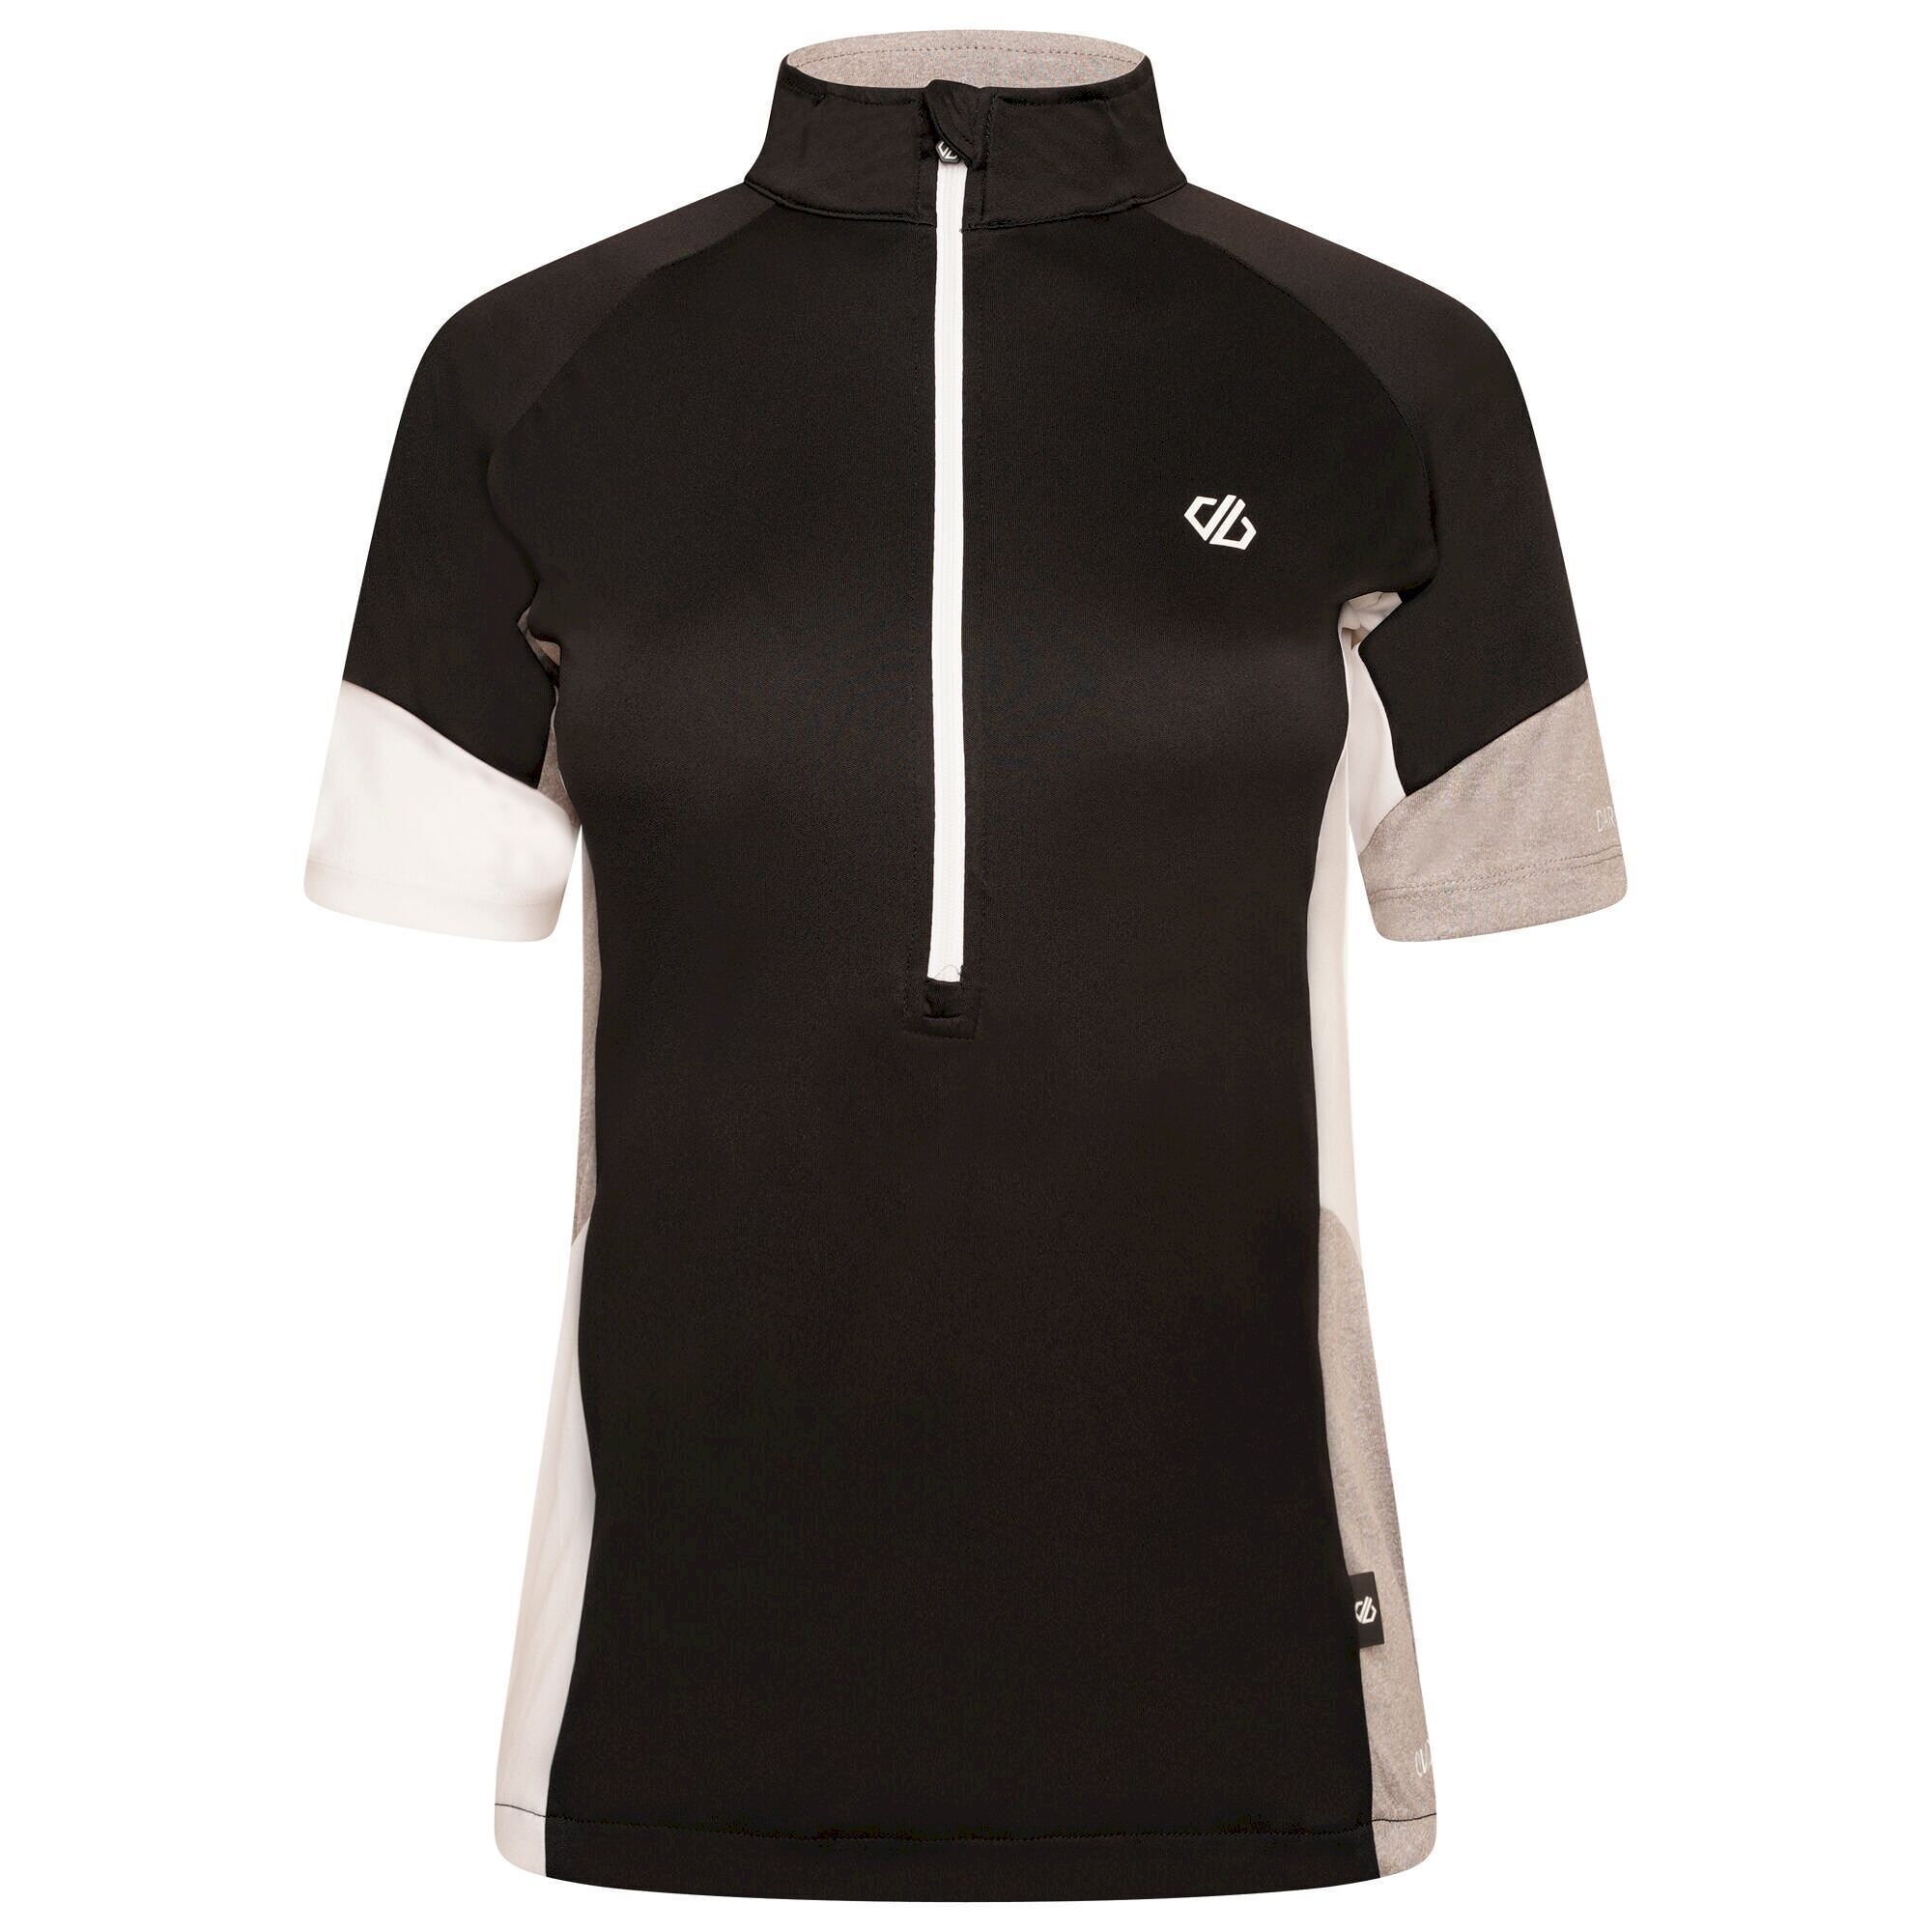 100% Polyester. Design: Colour Block, Logo. Fastening: Half Zip, Pull Over. Sleeve-Type: Short-Sleeved. Neckline: Standing Collar. Fabric Technology: Heat Resistant, Lightweight, Moisture Wicking, Q-Wic Plus, Quick Dry. Reflective Detail.